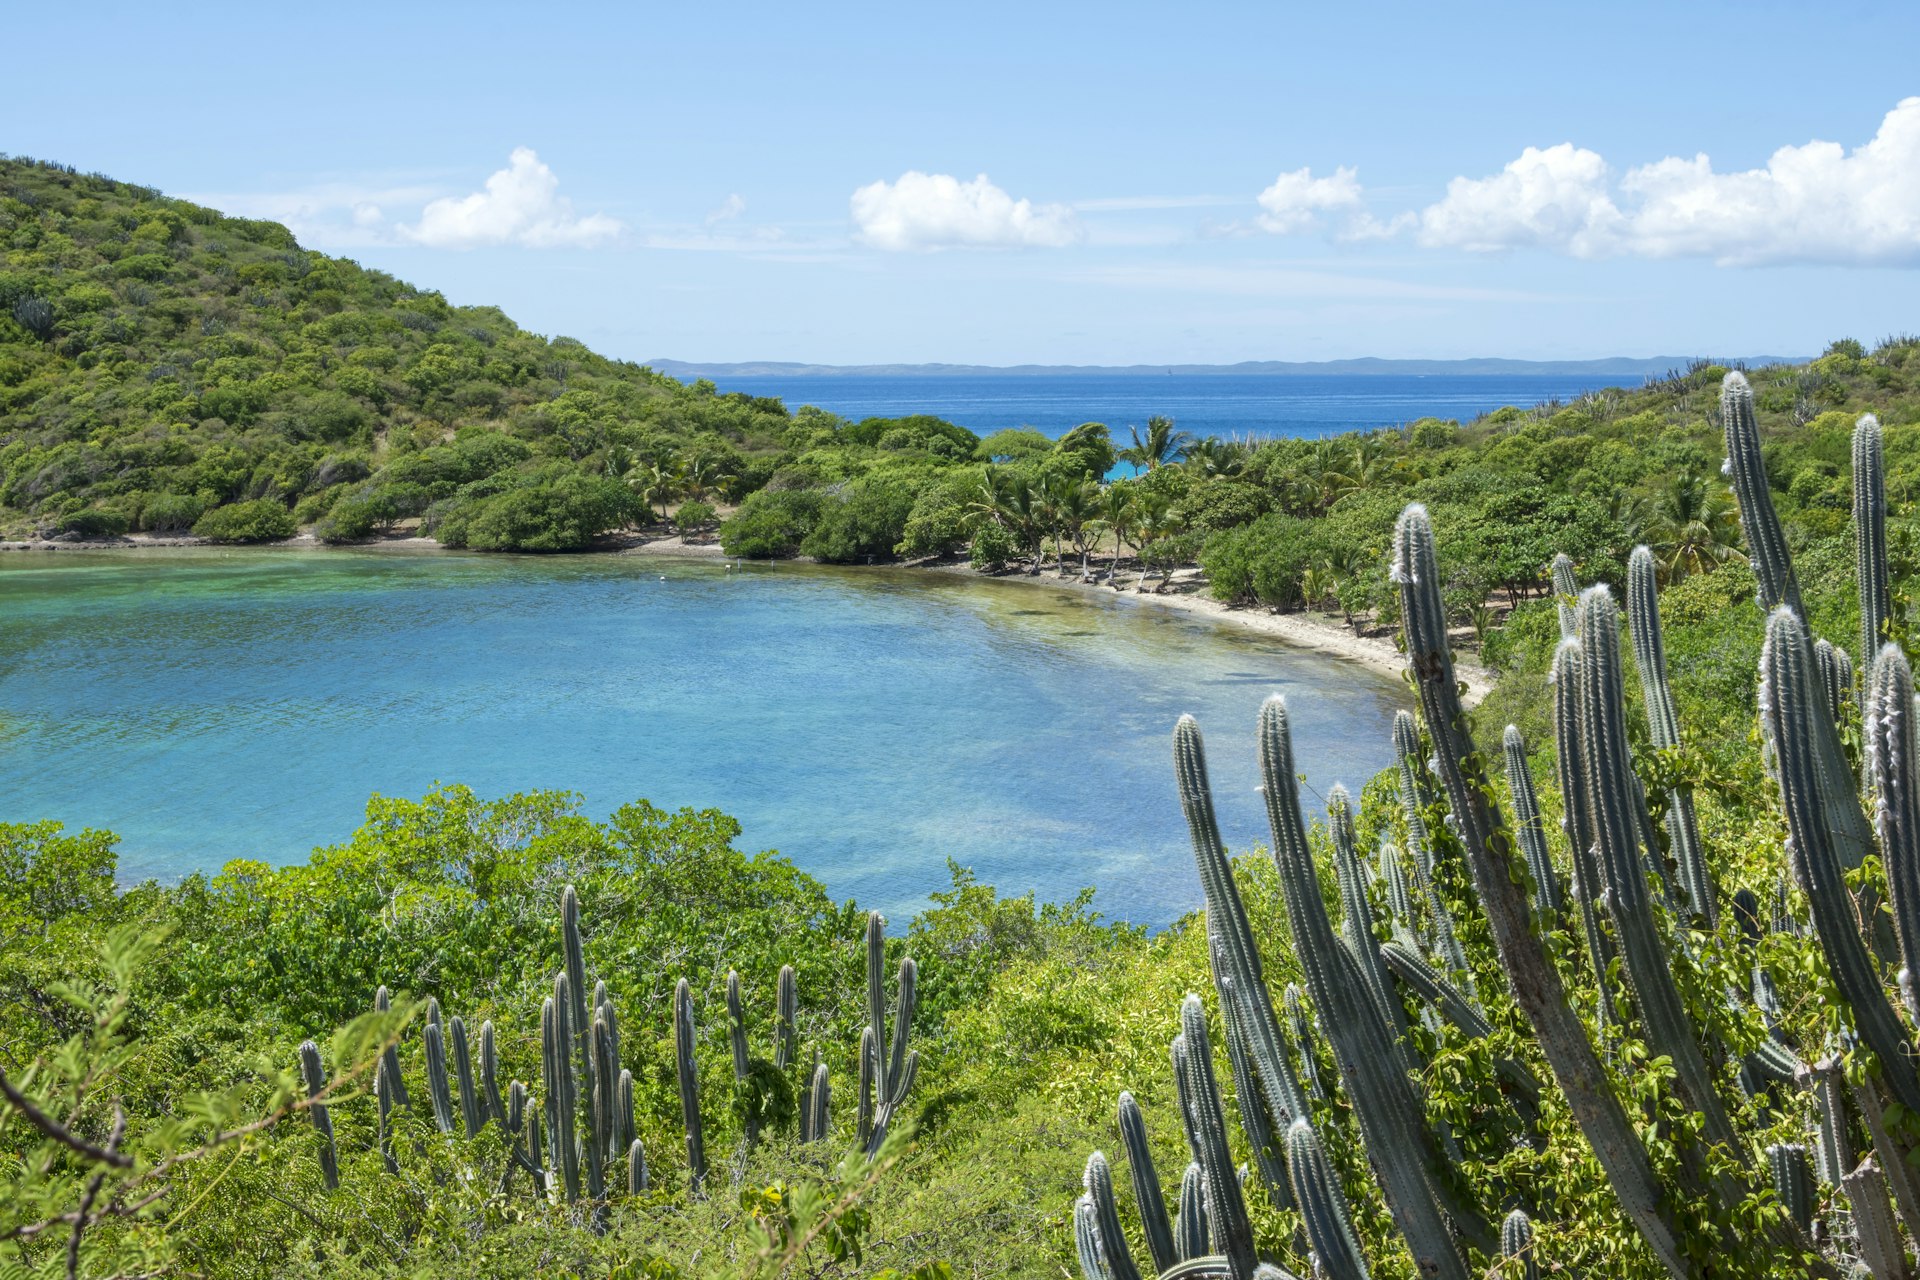 Dense vegetation and calm waters of Melena Bay and Soldier Point on Culebra, Puerto Rico